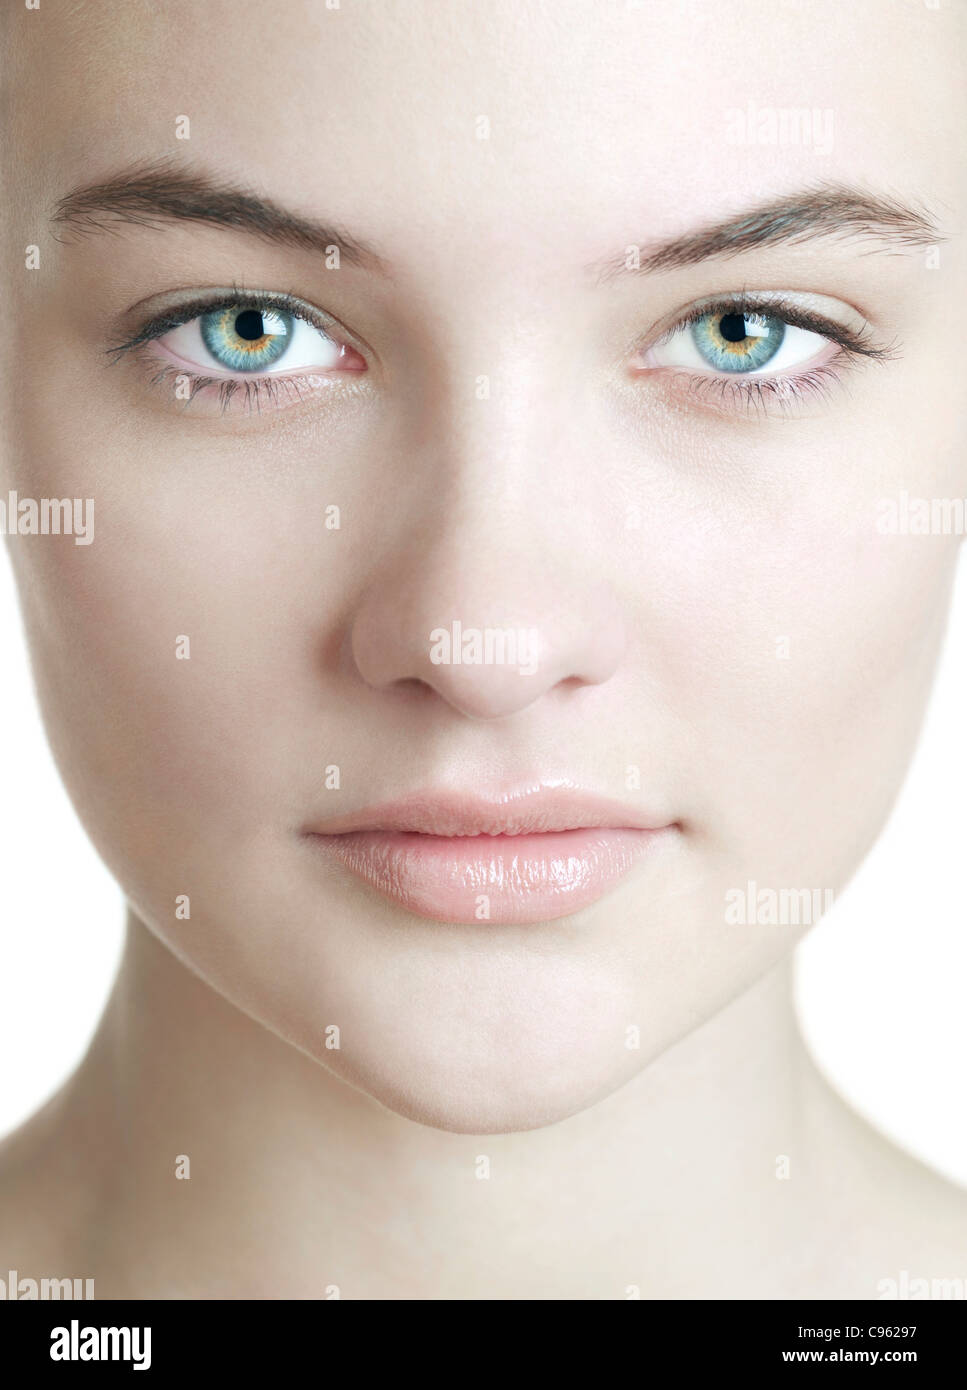 Healthy woman's face. Stock Photo